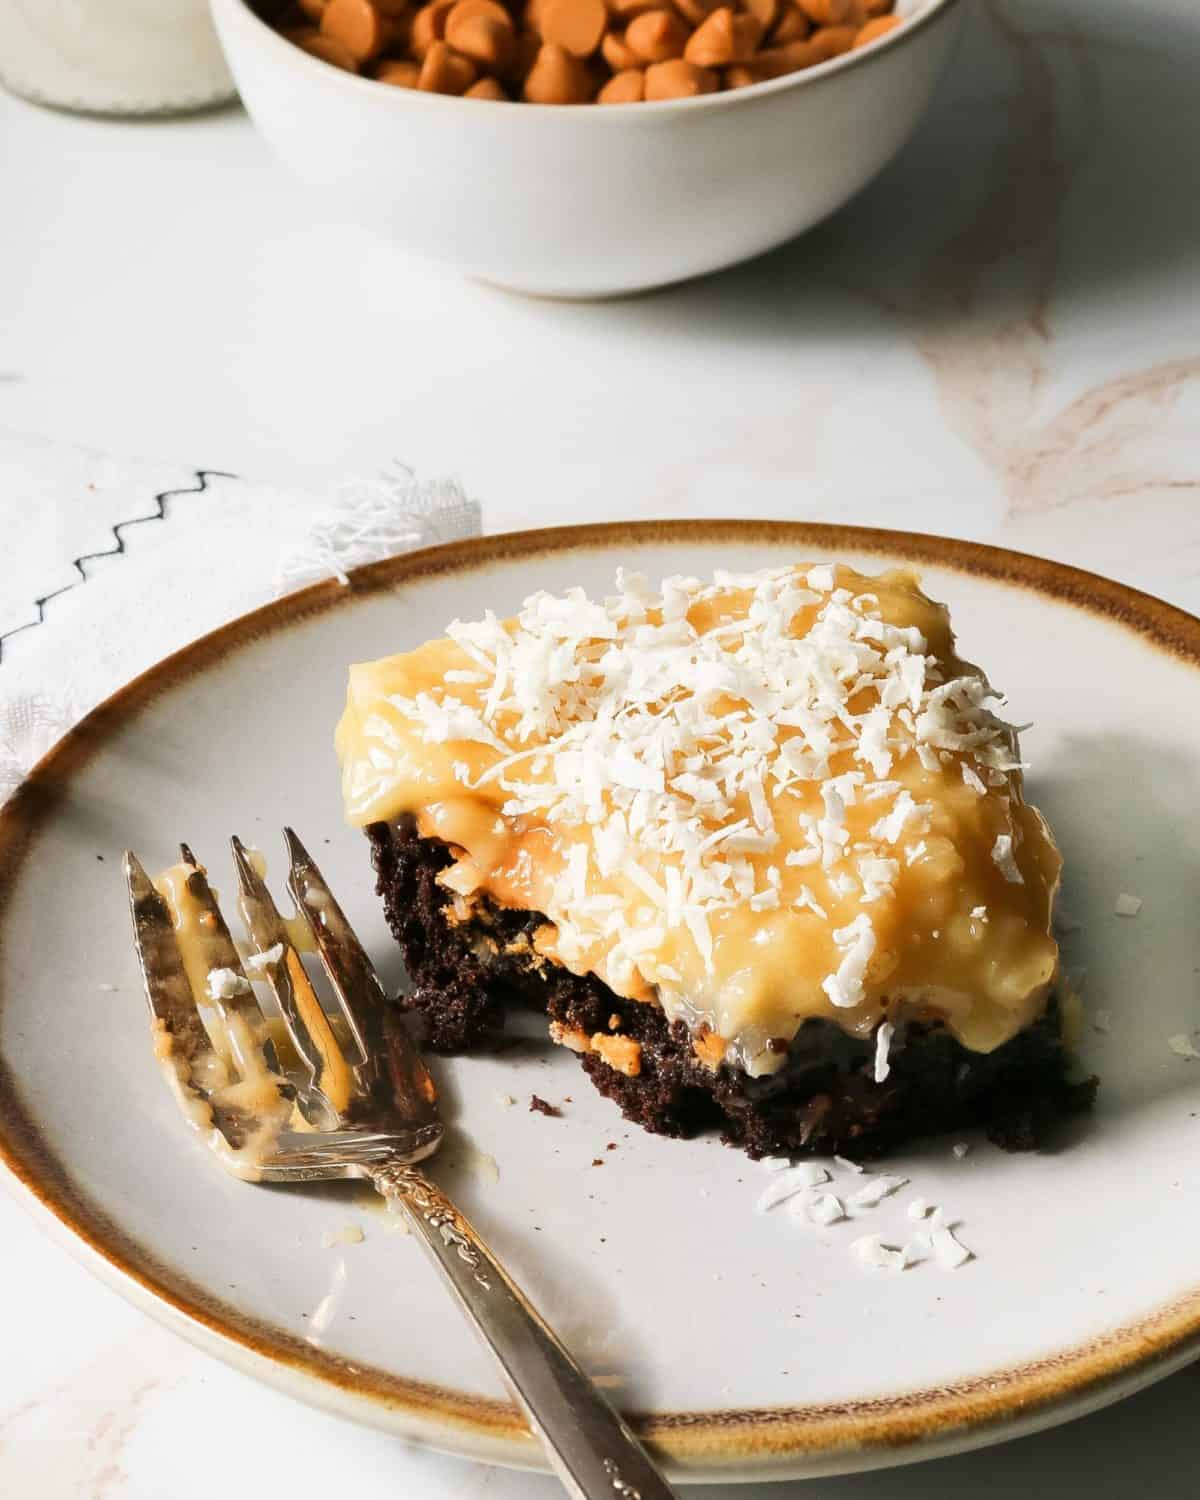 A bite of German chocolate brownie on a plate with a fork and crumbs.